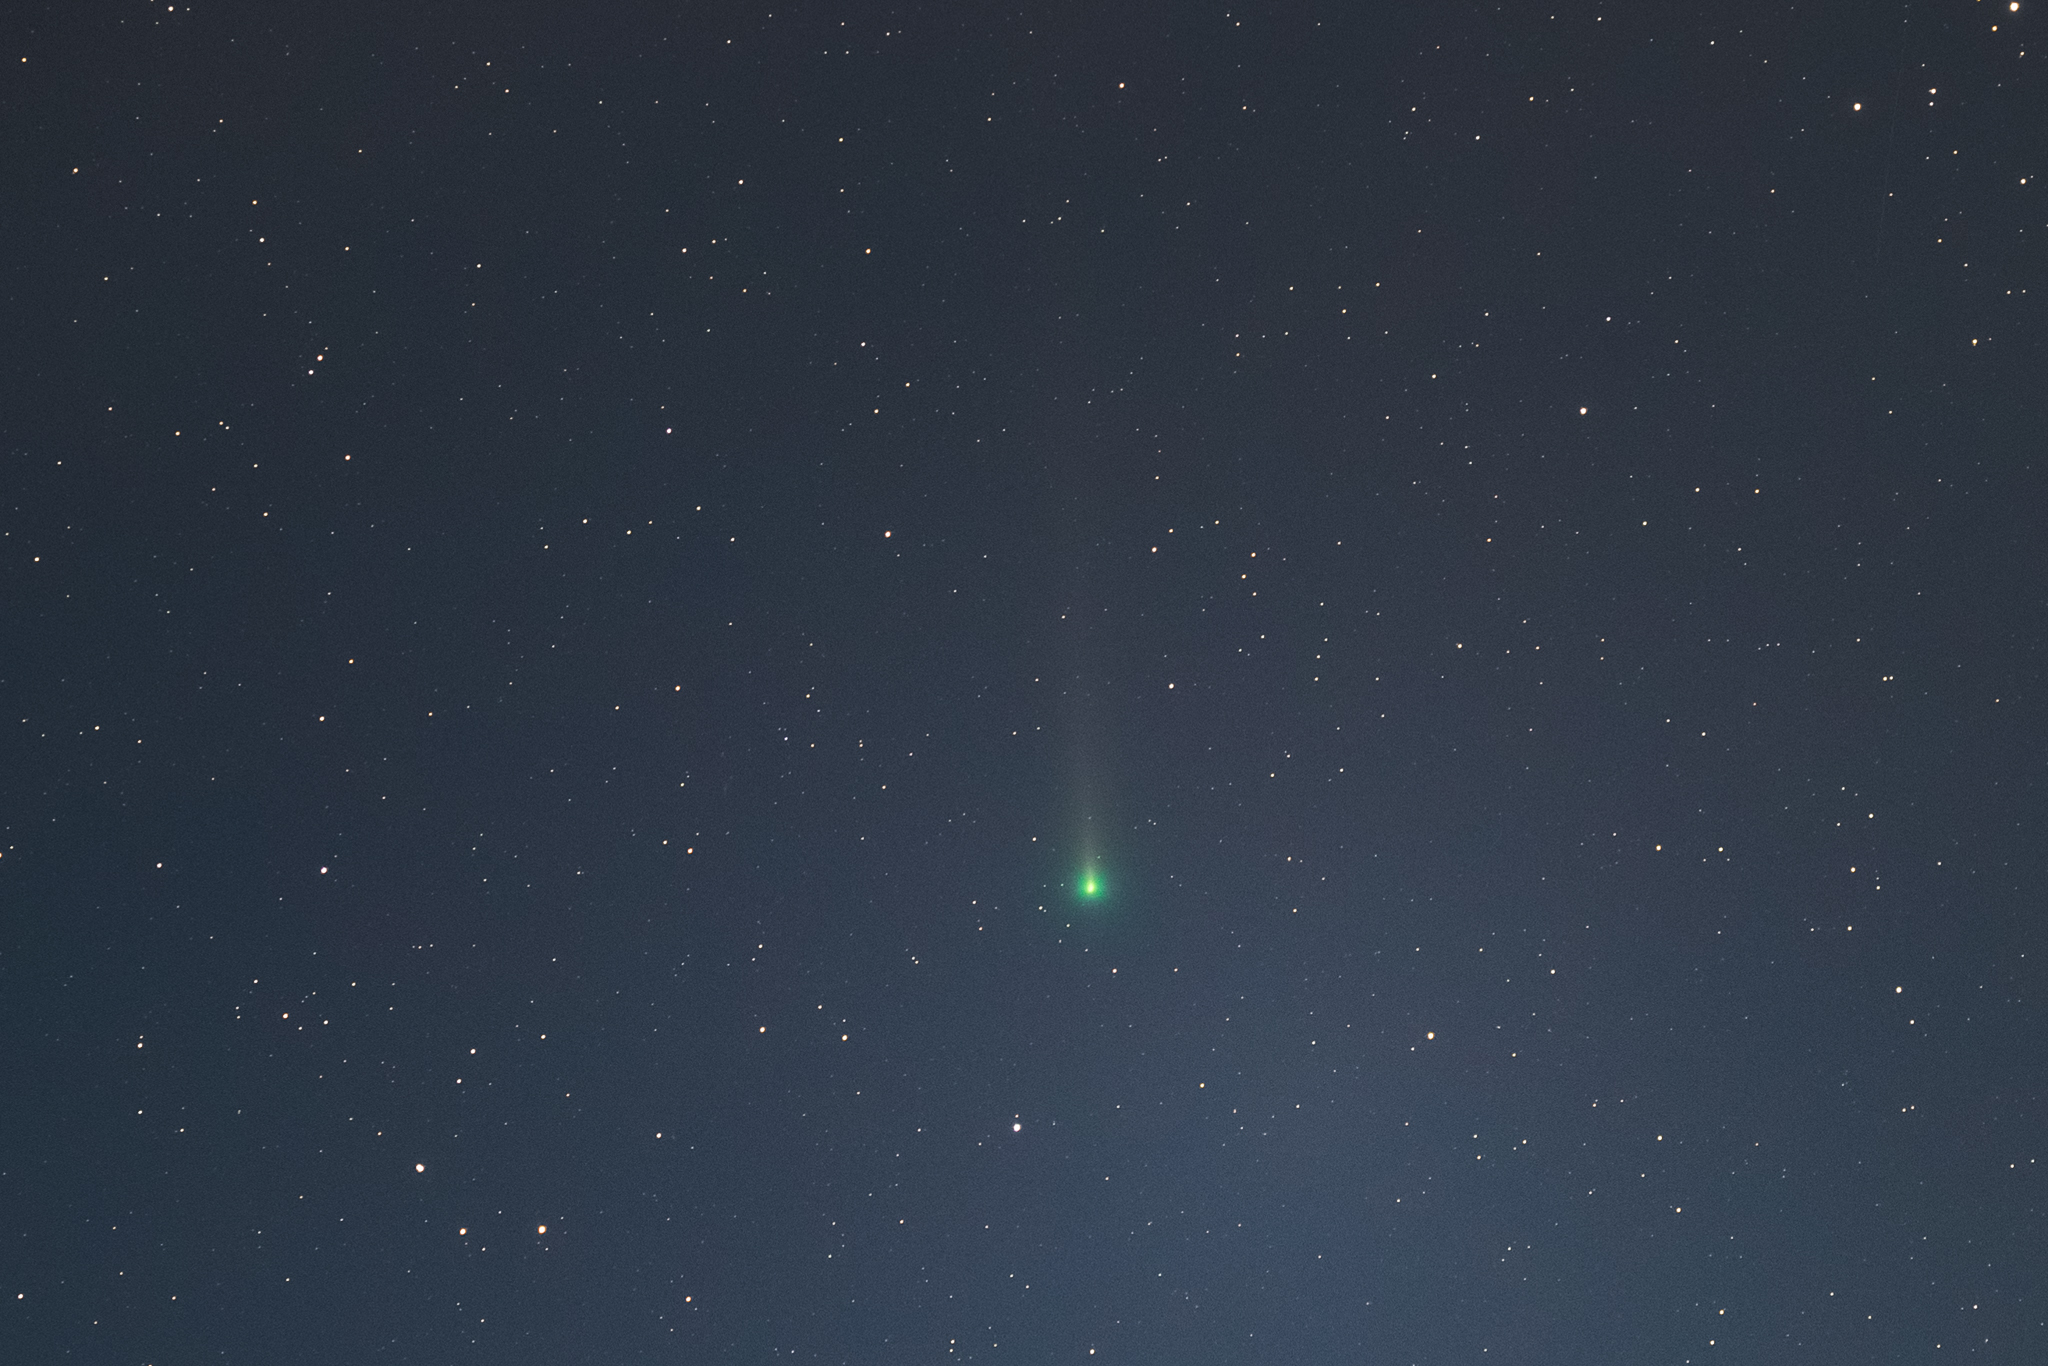 Beautiful Photos Show Comet Leonard Passing Earth Before It Vanishes